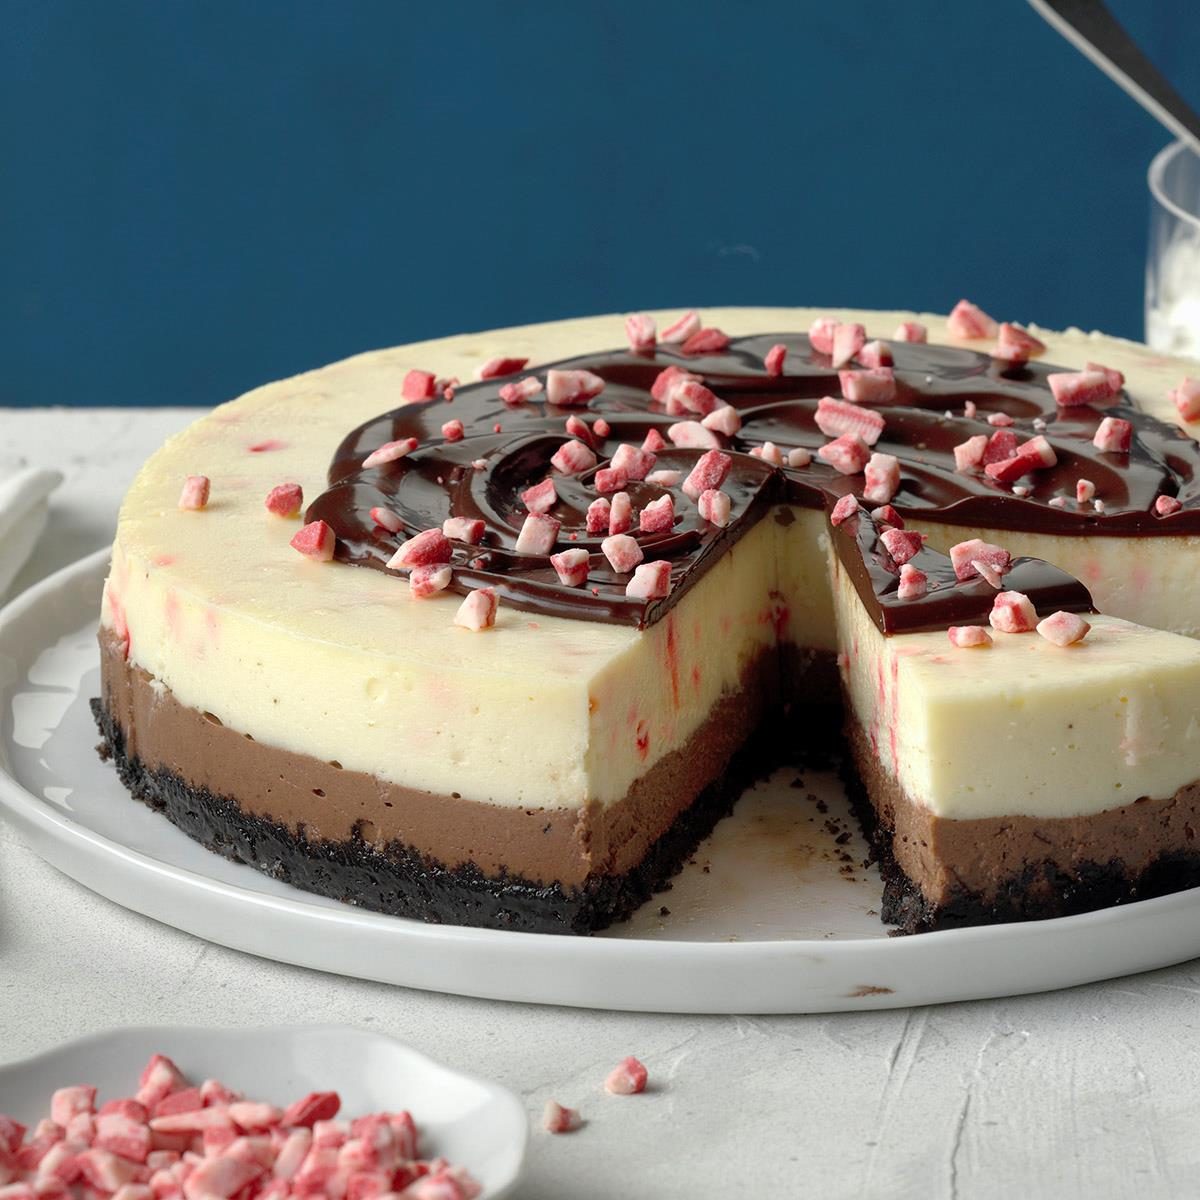 Mint Chocolate Cheesecake Recipe: How to Make It | Taste of Home